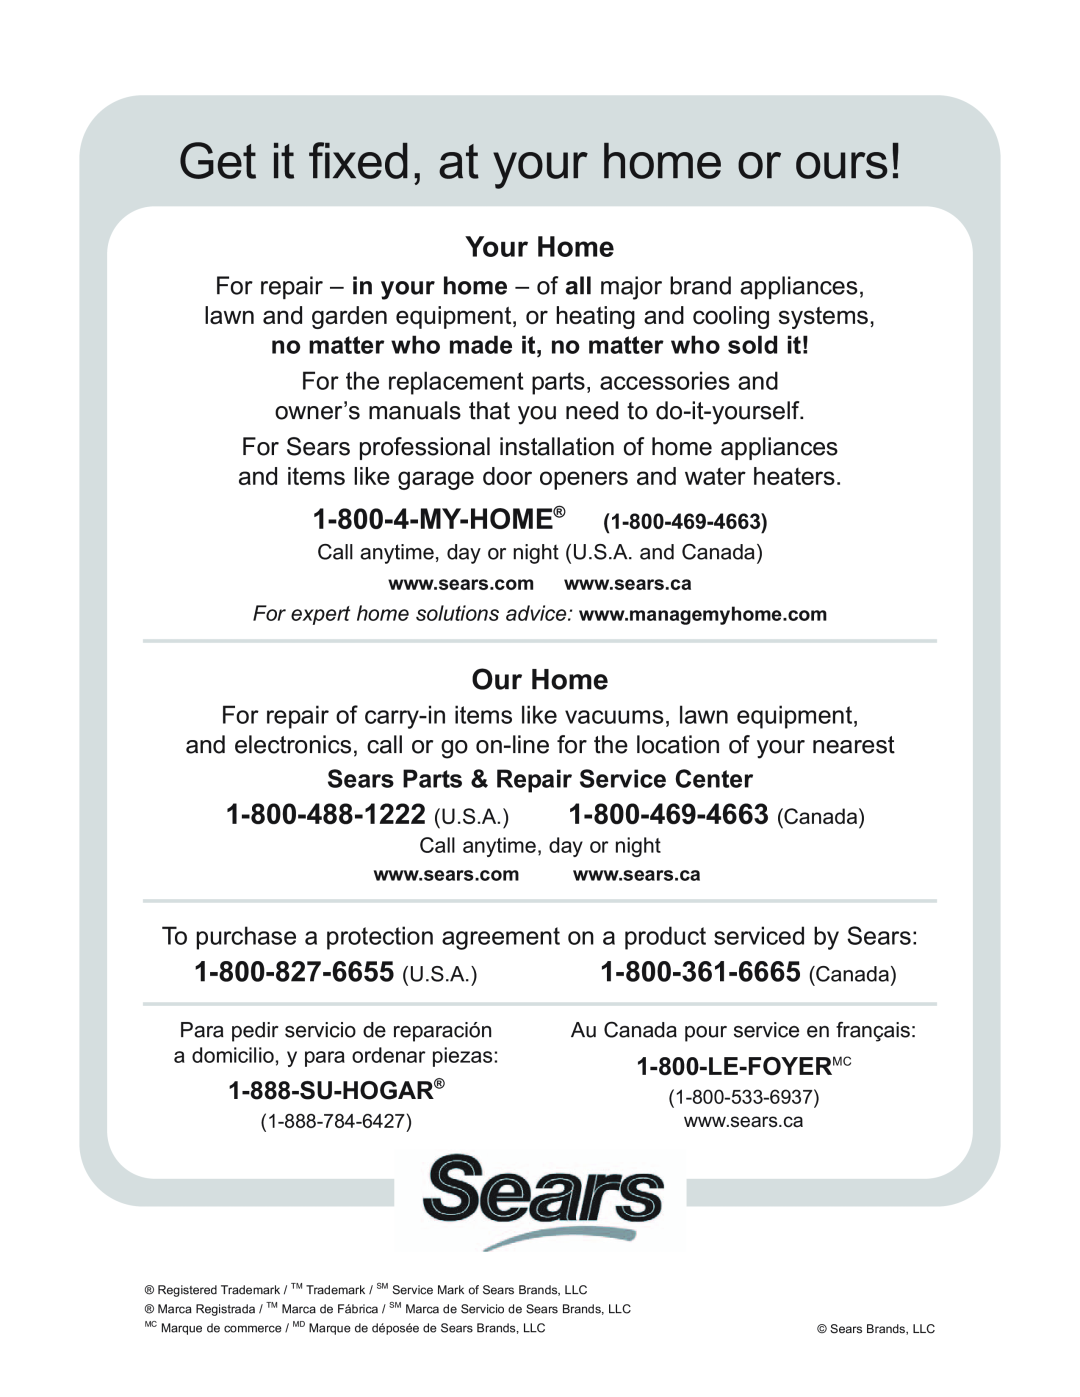 Kenmore 625.38448 Sears Parts & Repair Service Center, Su-Hogar, Le-Foyermc, Get it fixed, at your home or ours, Your Home 